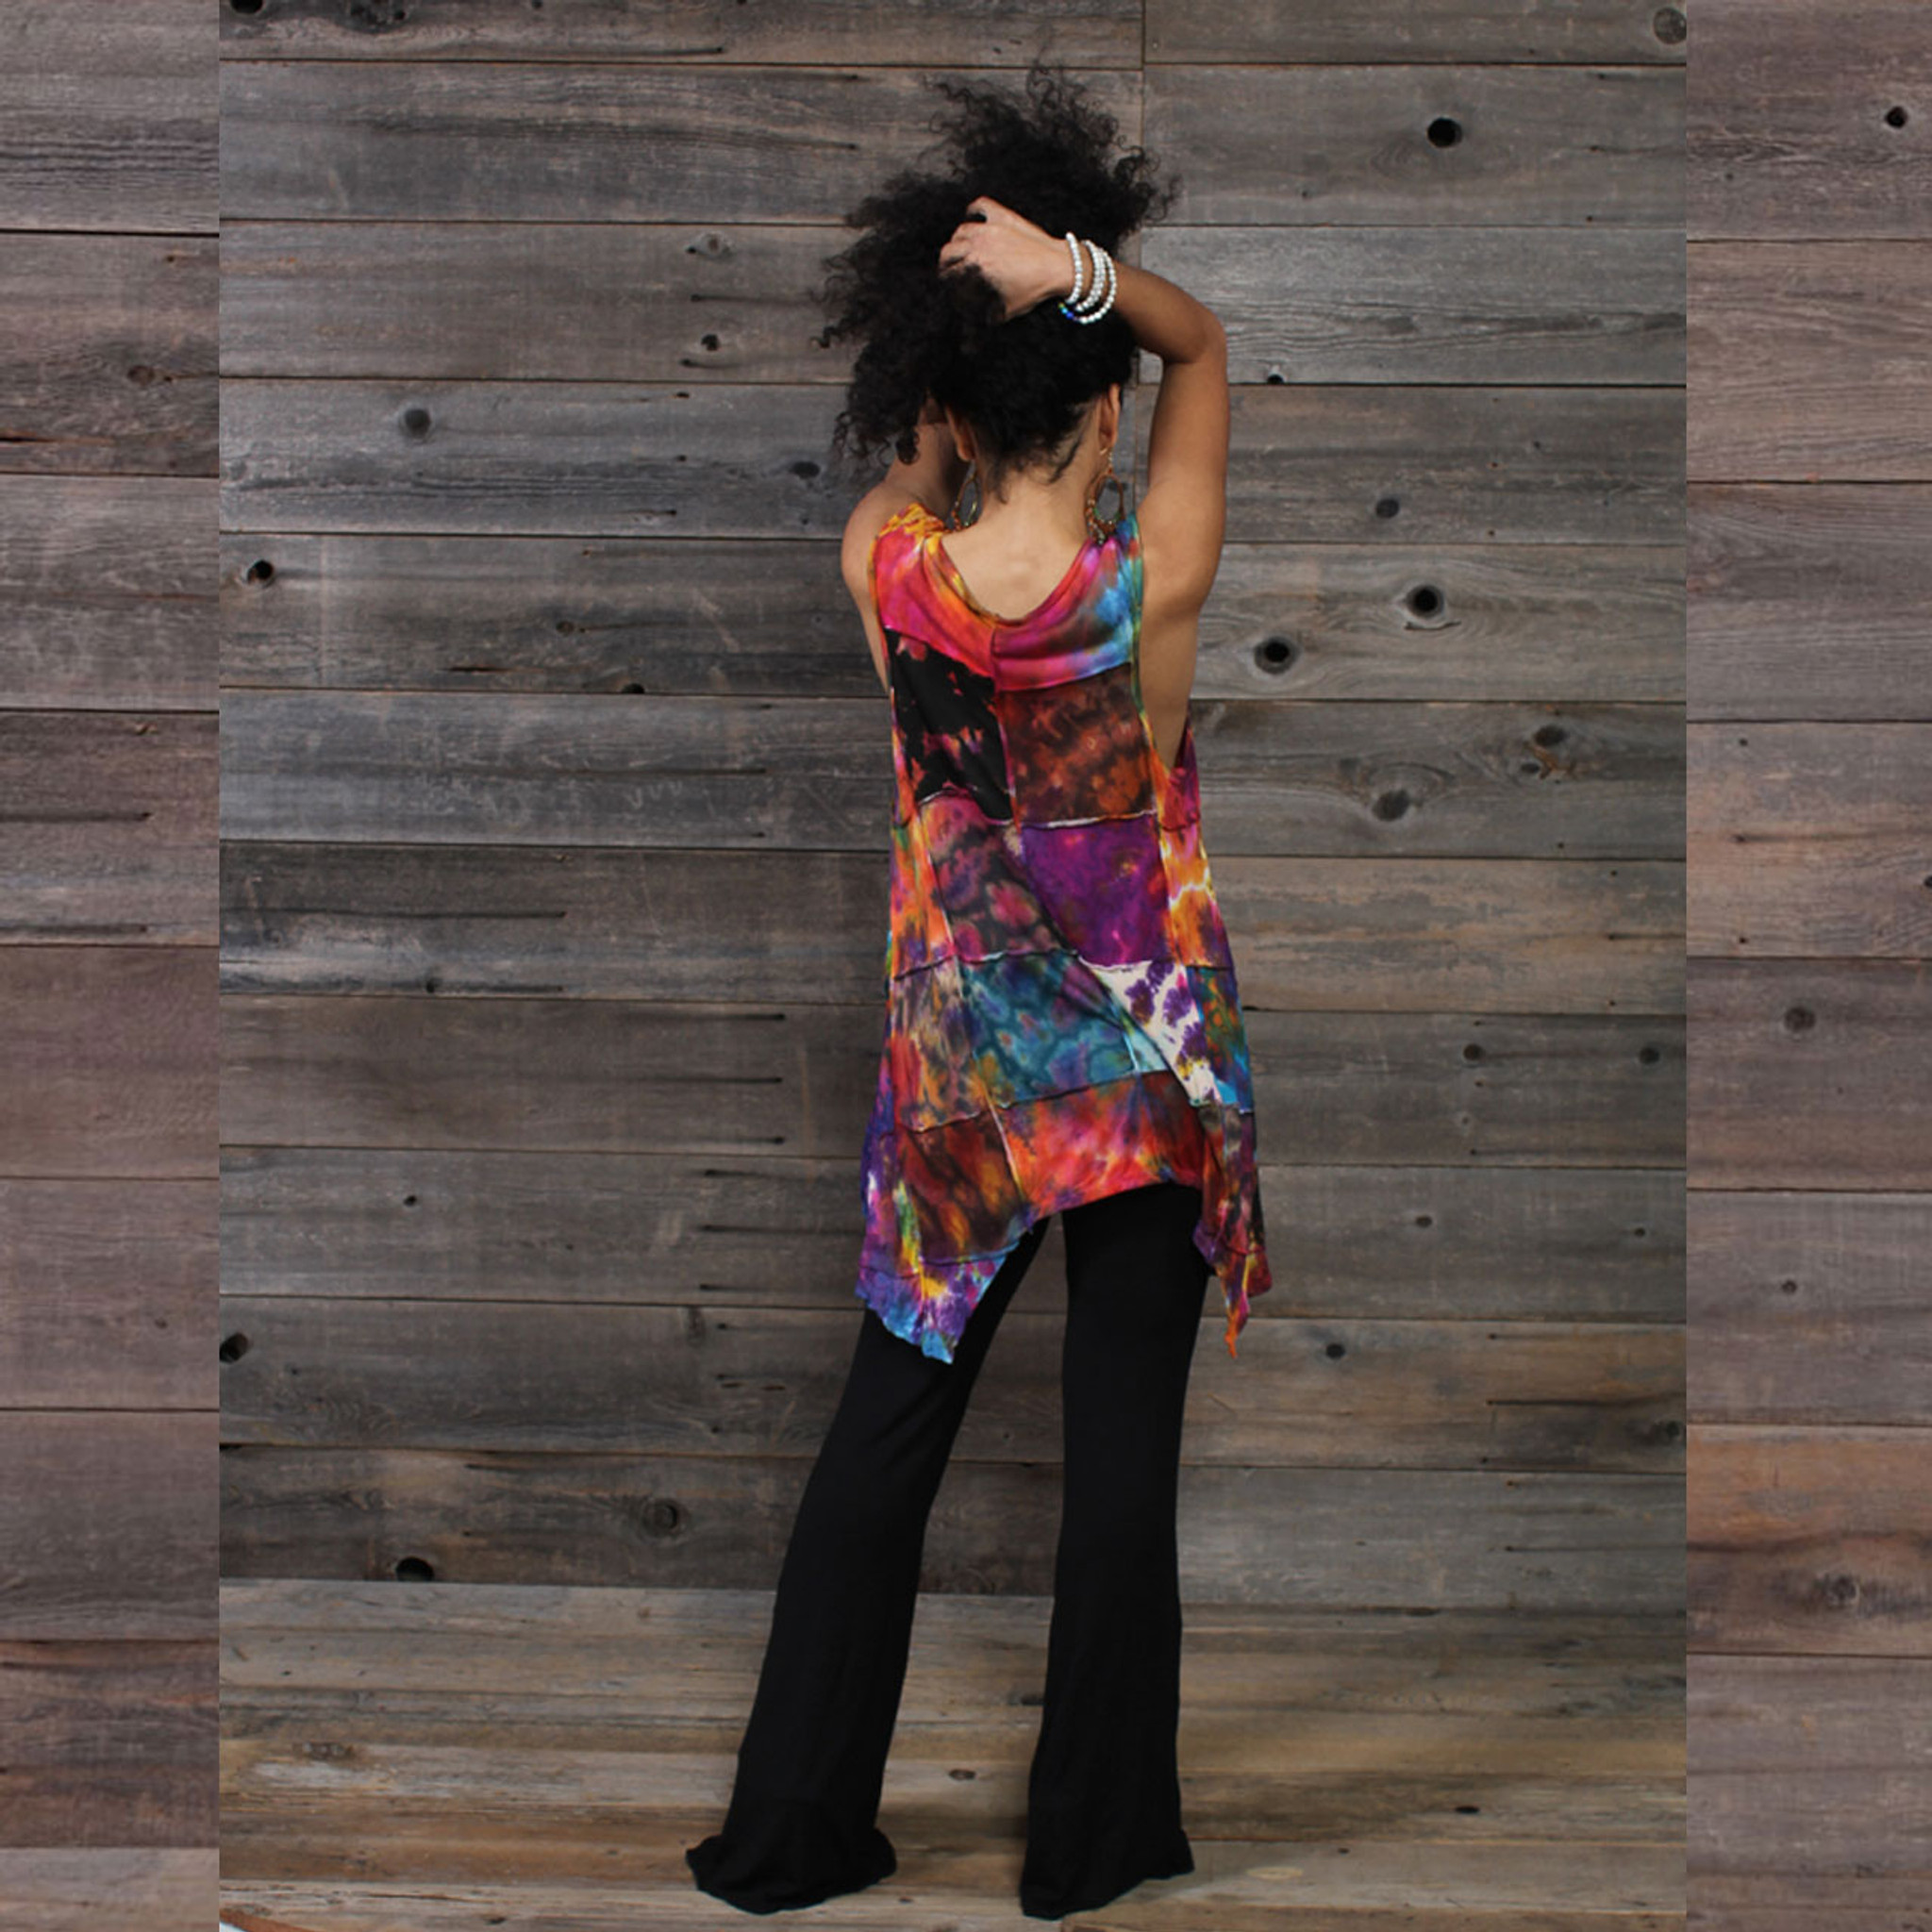 WILD RAINBOW LONG TOP Viscose Lycra Patchwork Bright Tie Dye Angle Cut Long Top With Pockets